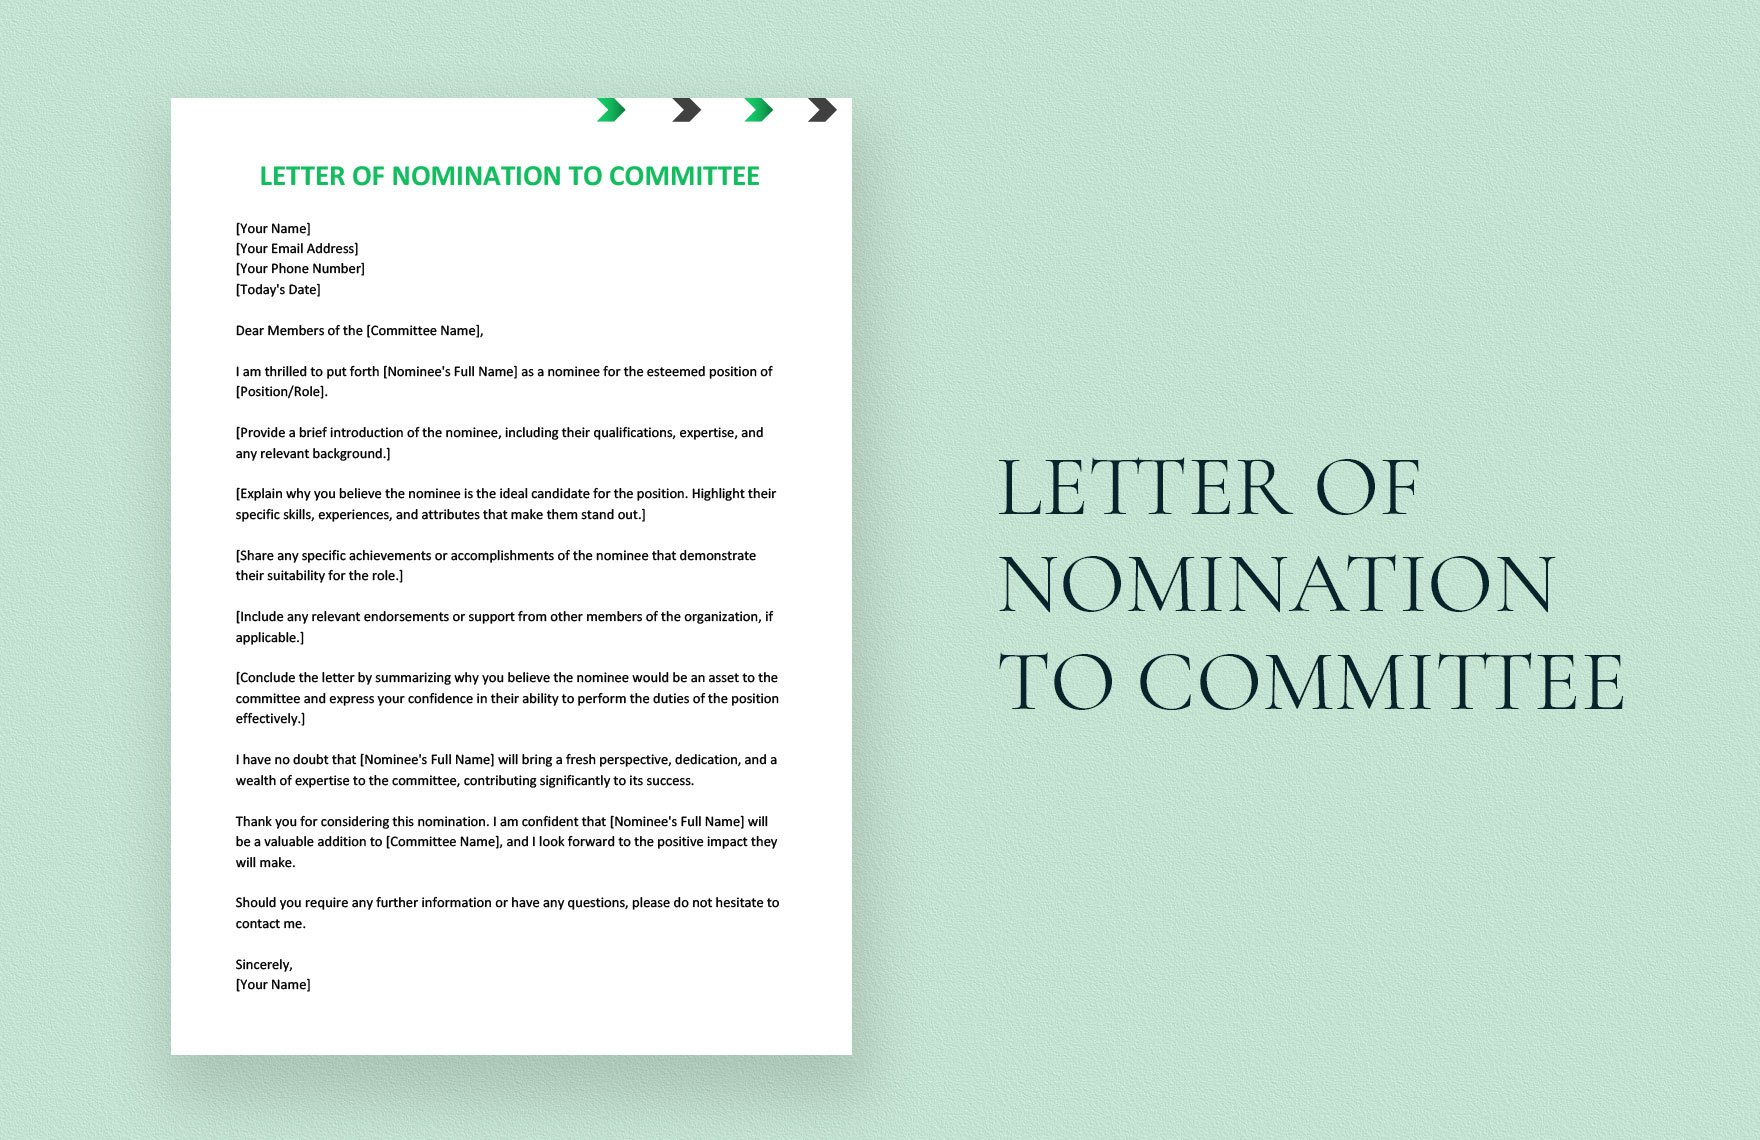 Letter of Nomination to Committee